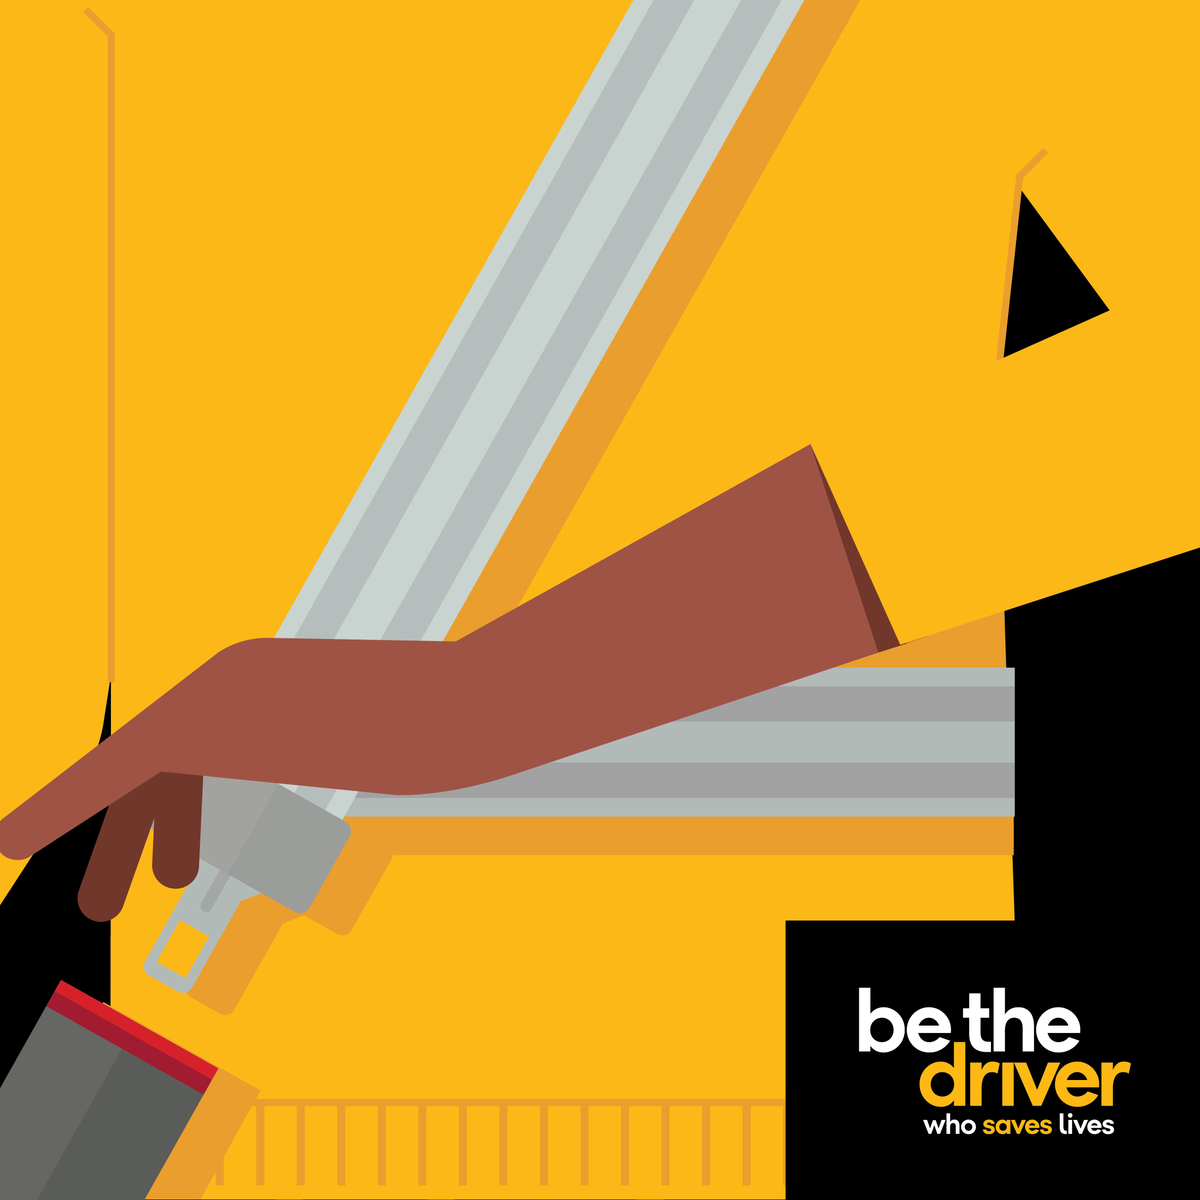 Driver safety starts with just one click. #BeTheDriver who knows to #BuckleUp for every ride. #SeatBeltSafety #ClickItOrTicket 🚗